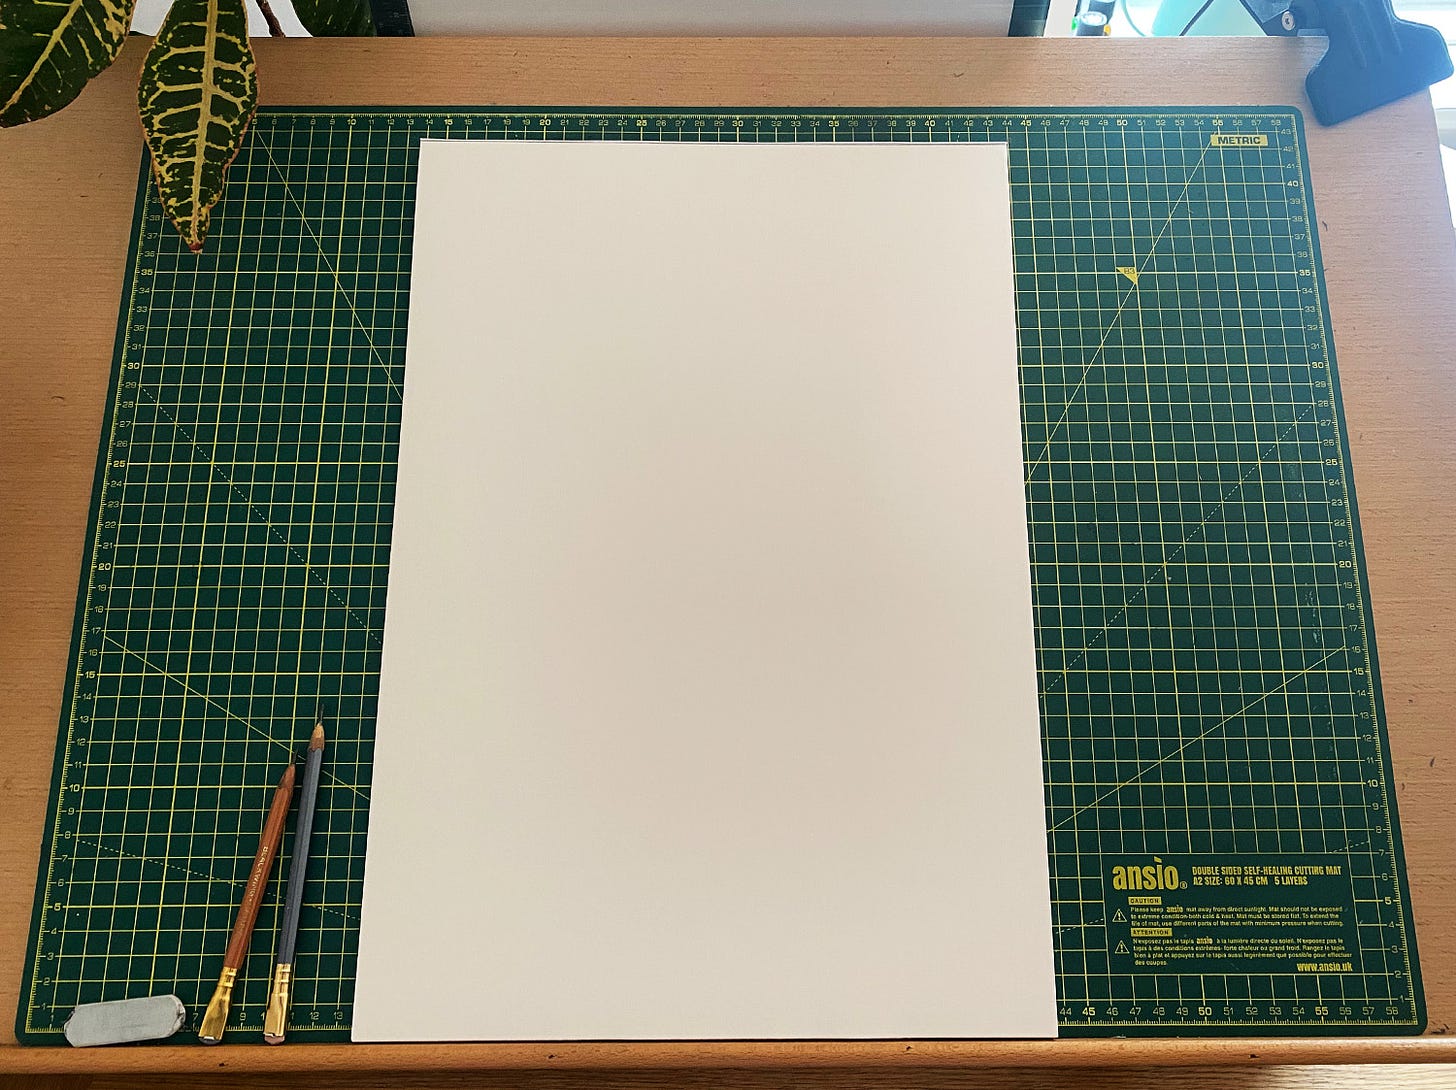 A photograph of Adam's desk with a sheet of blank A3 paper on it